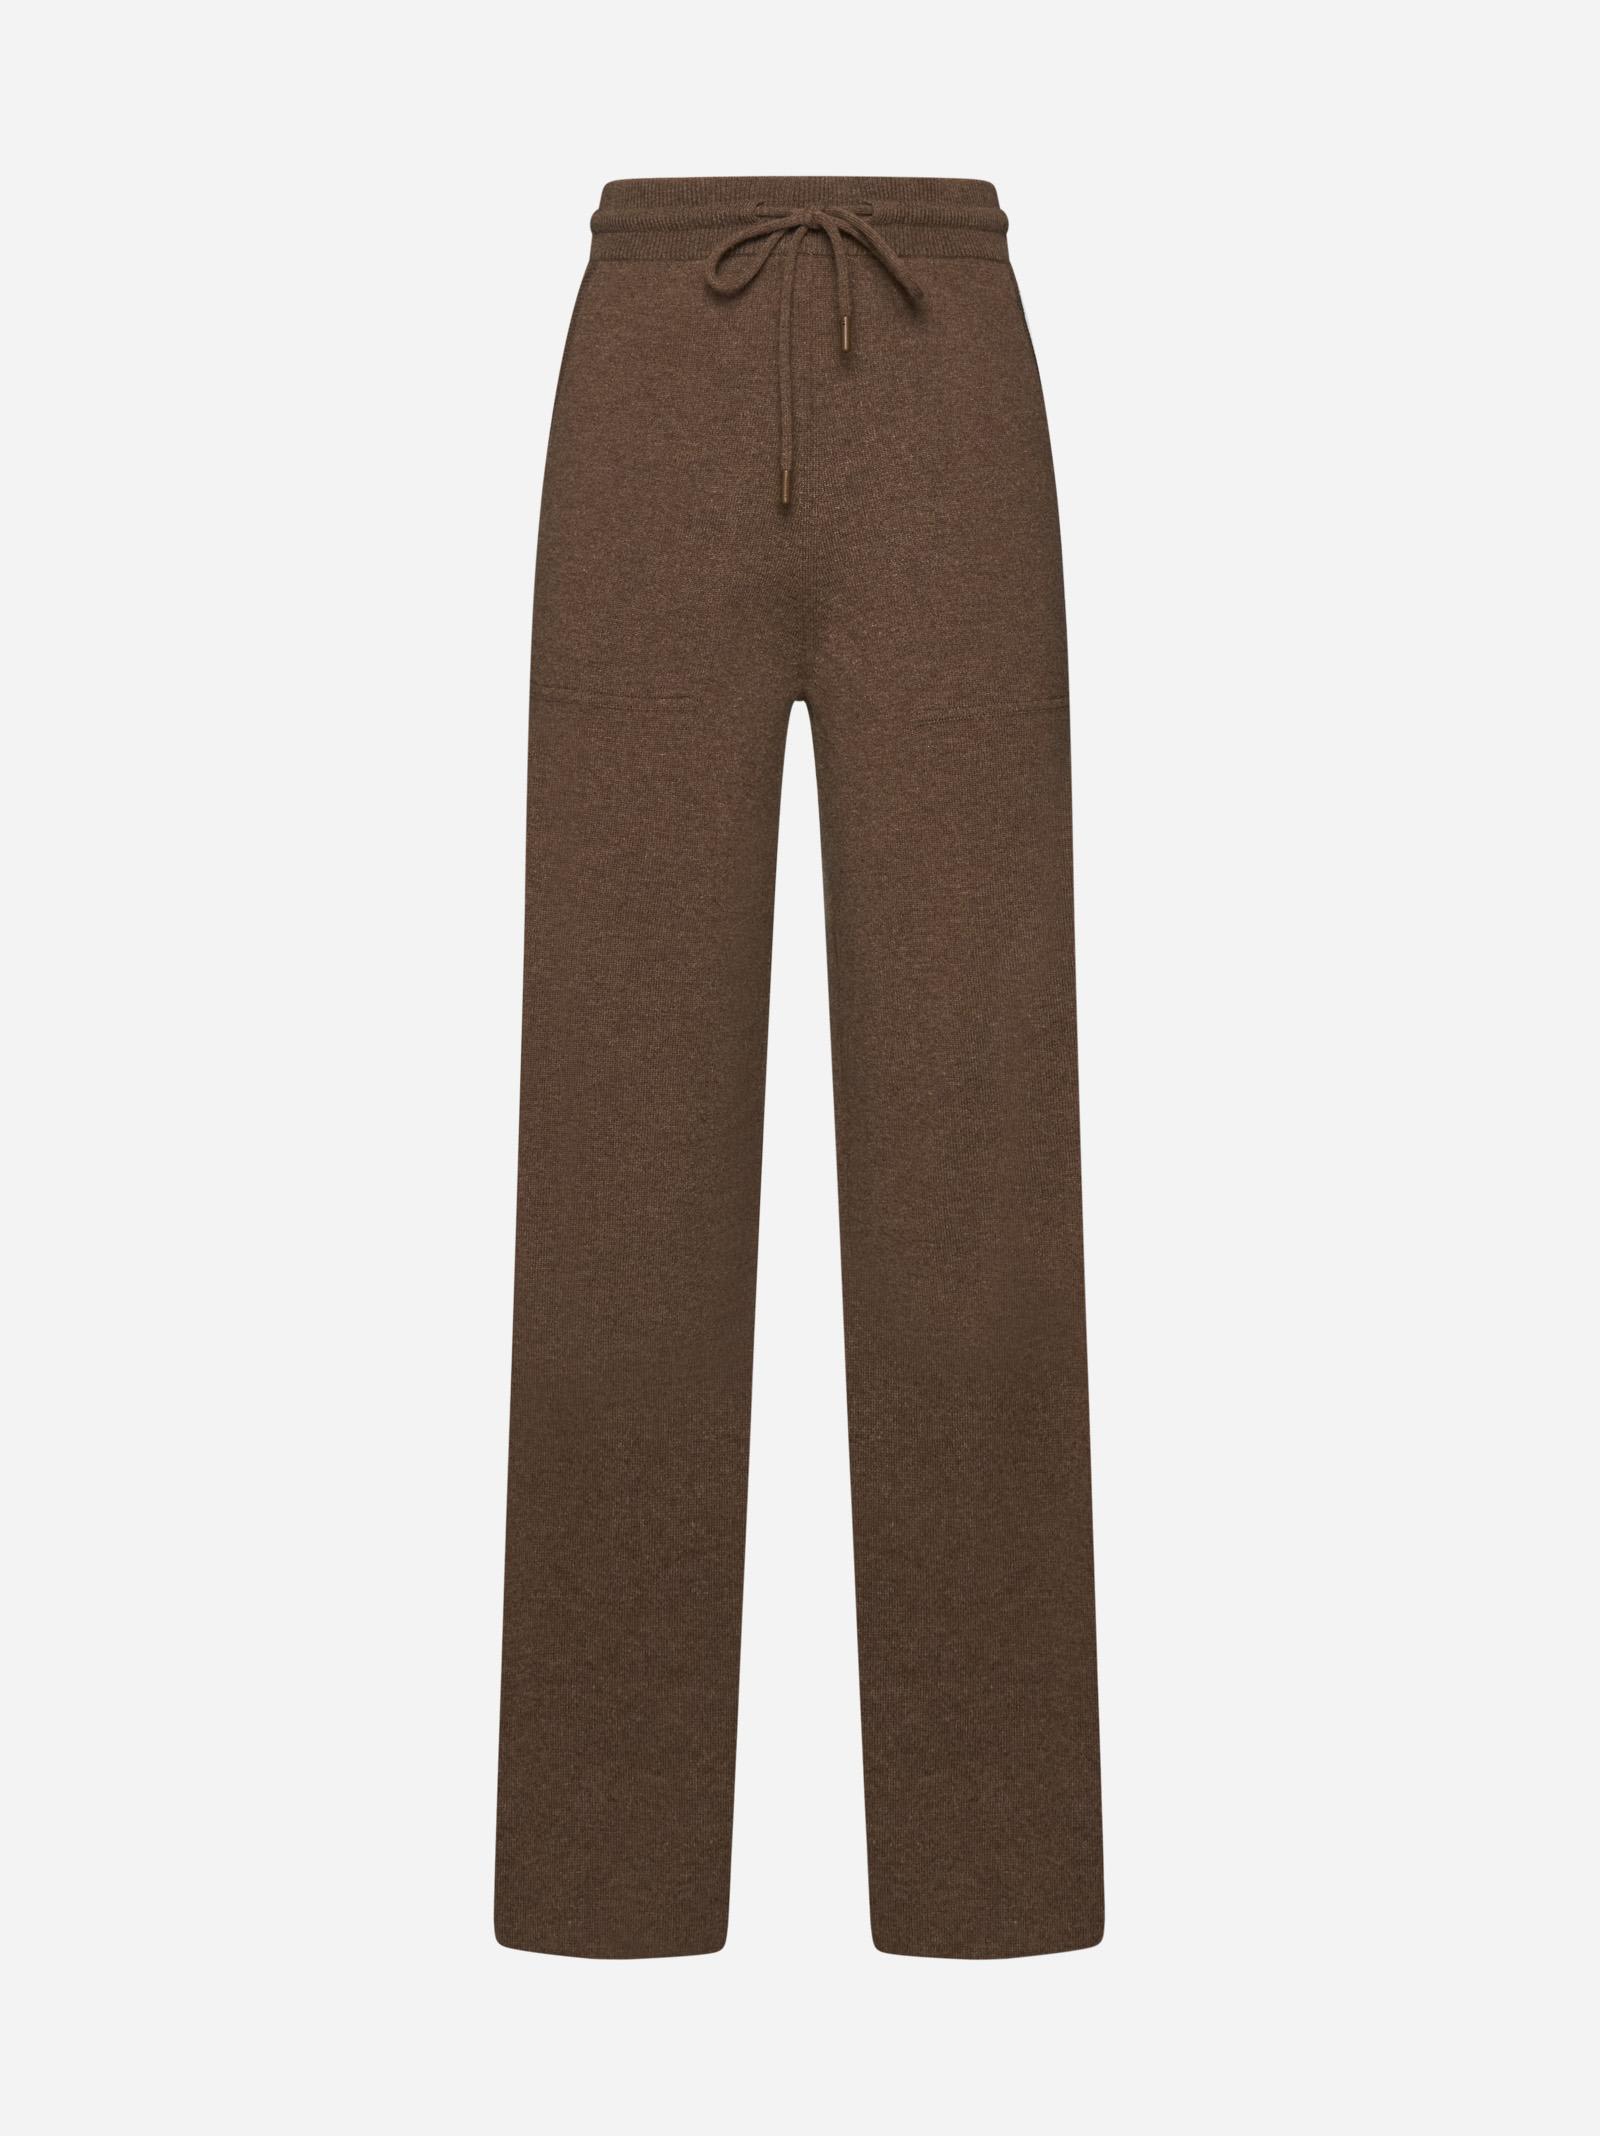 Max Mara Parole Wool And Cashmere Trousers